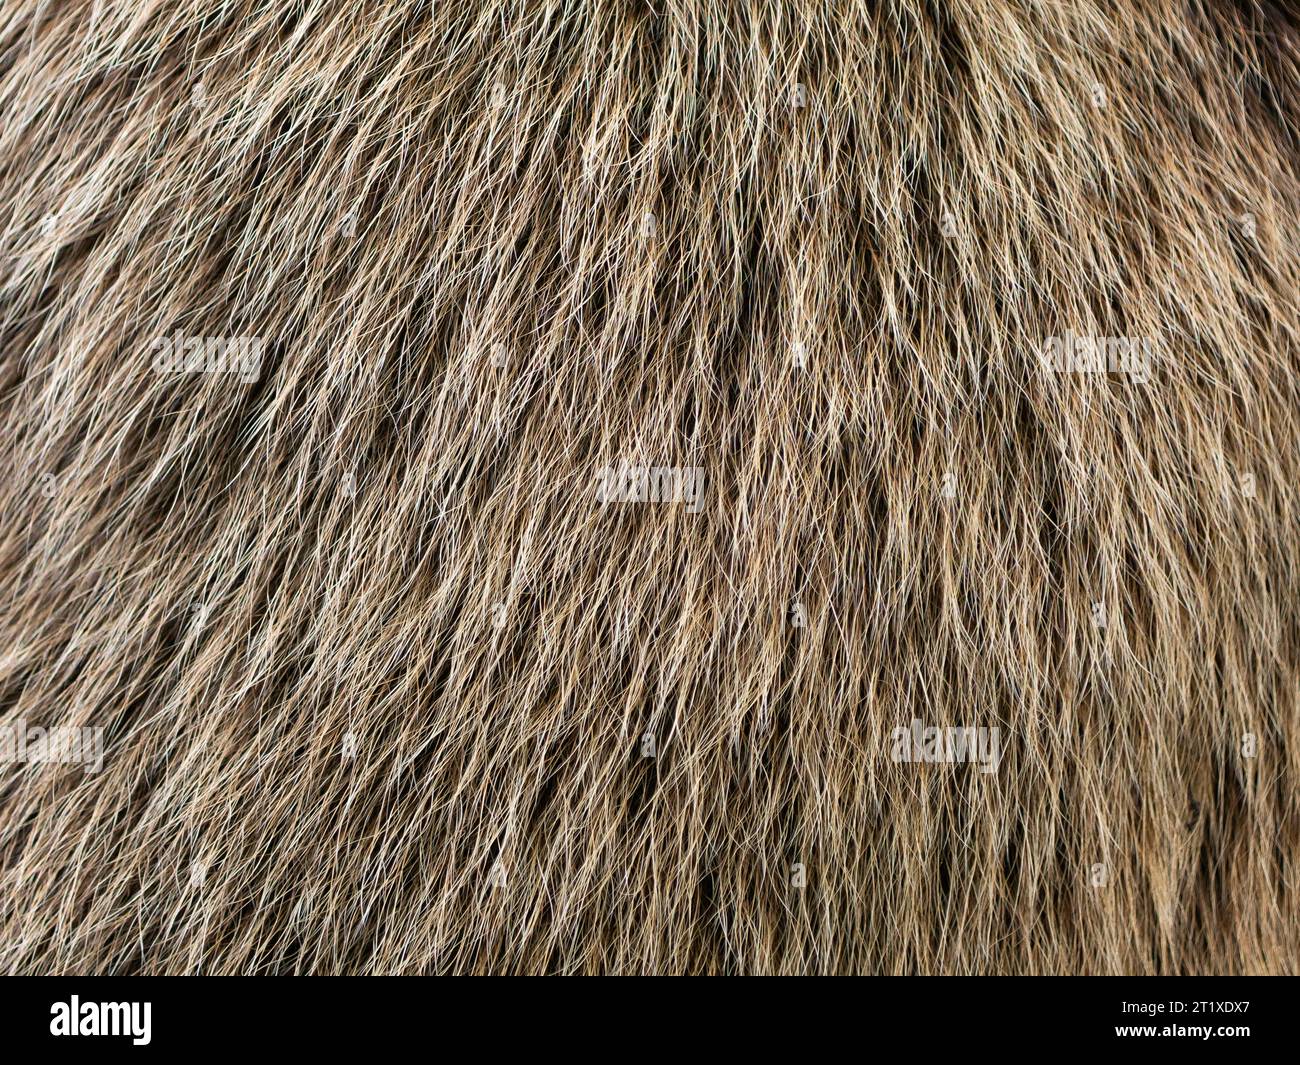 Bear fur texture in a close up. The hair of a Ursus arctos animal is fluffy and soft. The structure can be used as abstract background. Stock Photo